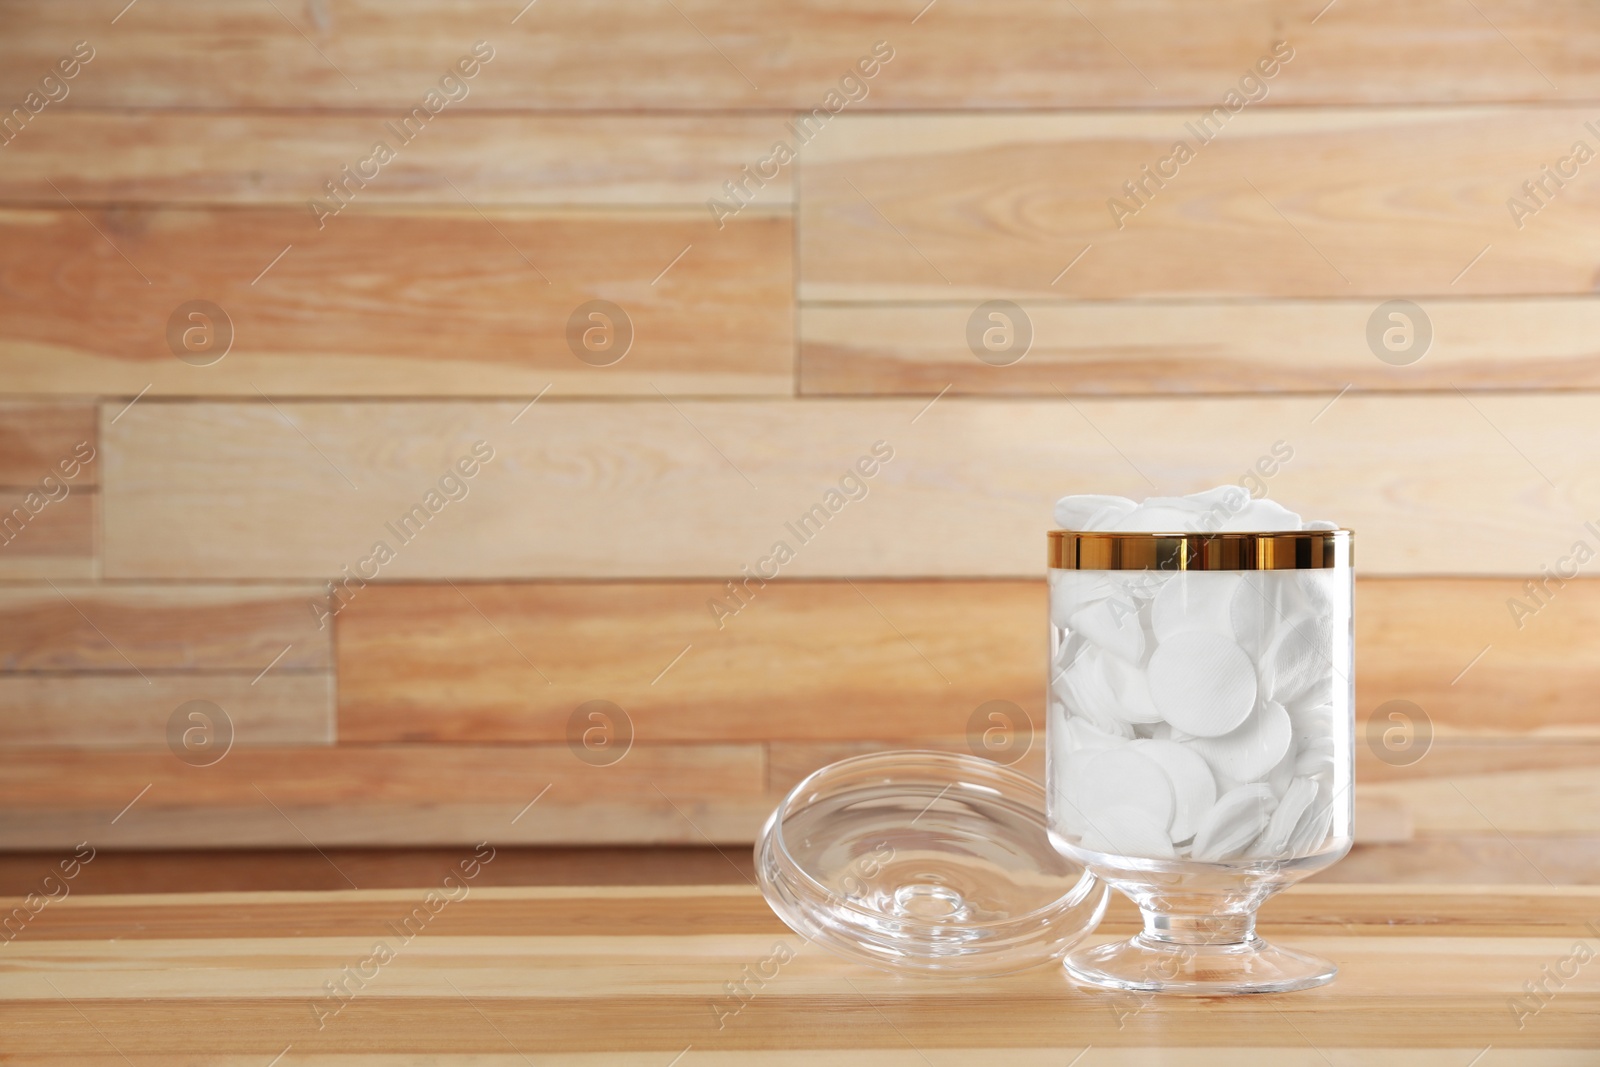 Photo of Decorative glass jar with cotton pads on table against wooden background. Space for text